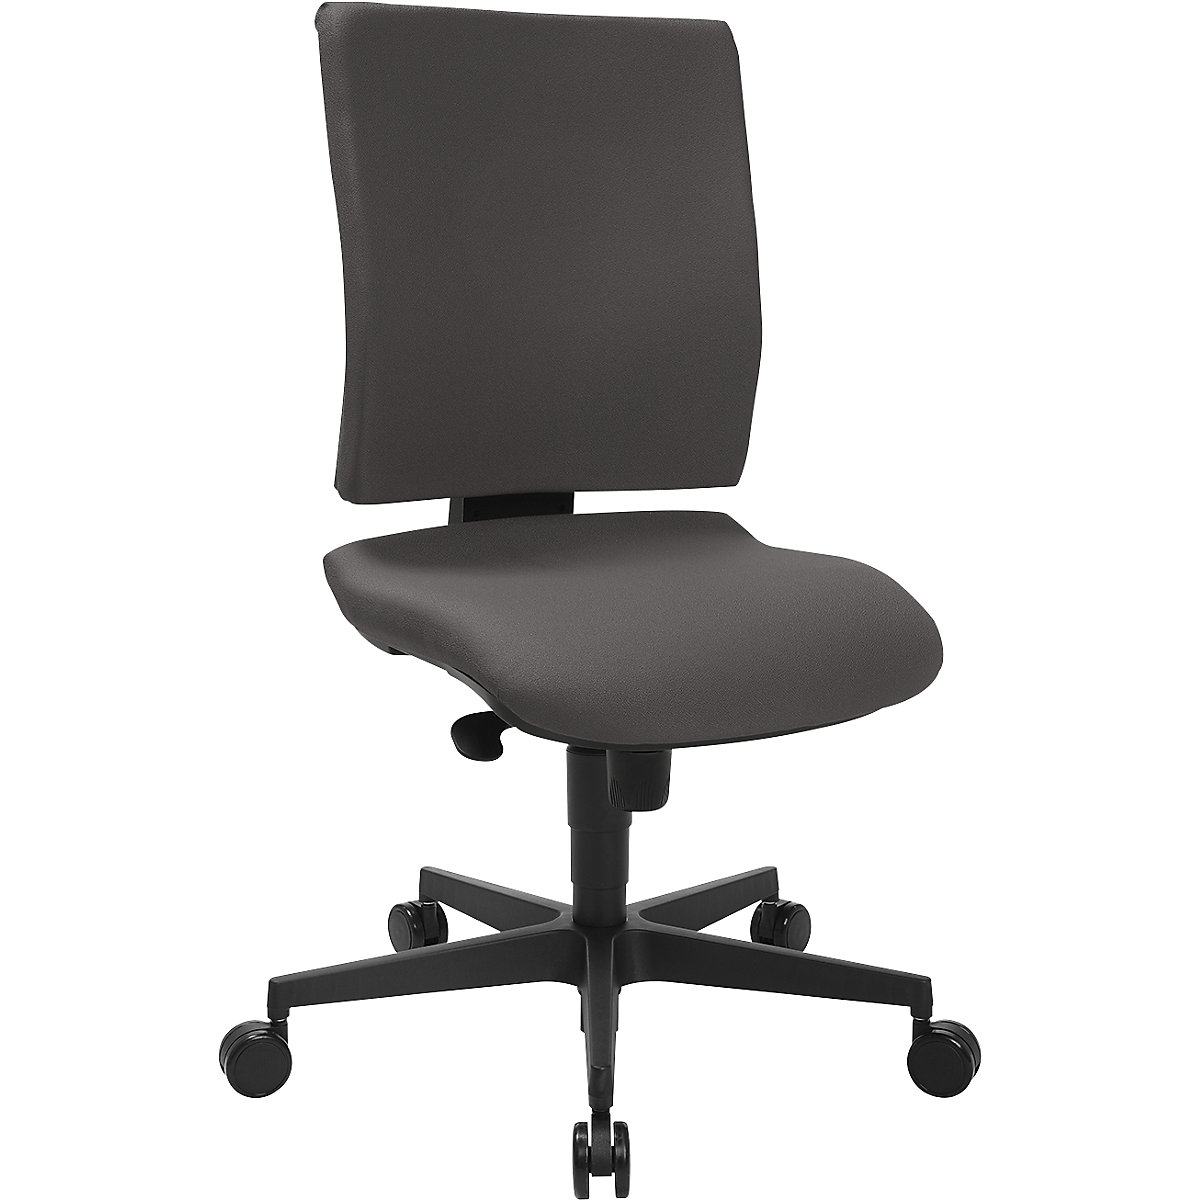 SYNCRO CLEAN office swivel chair – Topstar